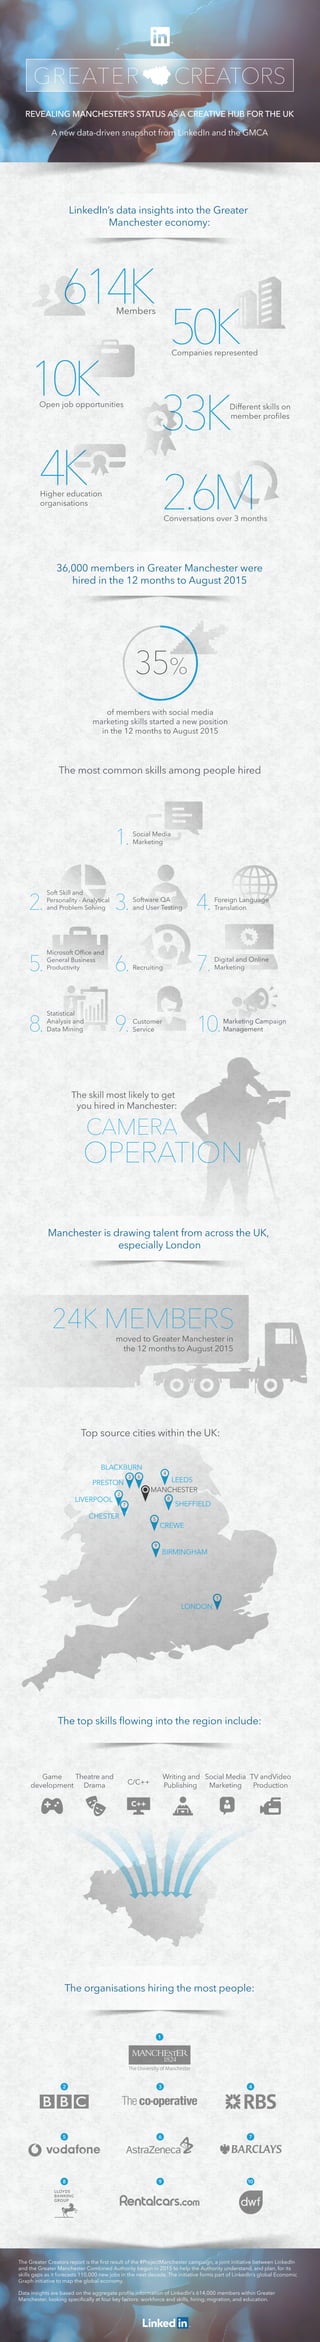 The Greater Creators report is the ﬁrst result of the #ProjectManchester campaign, a joint initiative between LinkedIn
and the Greater Manchester Combined Authority begun in 2015 to help the Authority understand, and plan, for its
skills gaps as it forecasts 110,000 new jobs in the next decade. The initiative forms part of LinkedIn’s global Economic
Graph initiative to map the global economy.
Data insights are based on the aggregate proﬁle information of LinkedIn's 614,000 members within Greater
Manchester, looking speciﬁcally at four key factors: workforce and skills, hiring, migration, and education.
BIRMINGHAM
of members with social media
marketing skills started a new position
in the 12 months to August 2015
moved to Greater Manchester in
the 12 months to August 2015
35%
GREATER CREATORSGREATER CREATORS
LinkedIn’s data insights into the Greater
Manchester economy:
REVEALING MANCHESTER’S STATUS AS A CREATIVE HUB FOR THE UK
A new data-driven snapshot from LinkedIn and the GMCA
36,000 members in Greater Manchester were
hired in the 12 months to August 2015
614K
4K
Different skills on
member proﬁles
33K
The most common skills among people hired
The skill most likely to get
you hired in Manchester:
Top source cities within the UK:
2.6M
10K
Members
Open job opportunities
Higher education
organisations
Conversations over 3 months
Companies represented
50K
2.
Soft Skill and
Personality - Analytical
and Problem Solving 3.Software QA
and User Testing
1.Social Media
Marketing
4.Foreign Language
Translation
5.
Microsoft Ofﬁce and
General Business
Productivity 6.Recruiting 7.Digital and Online
Marketing
8.
Statistical
Analysis and
Data Mining 9.Customer
Service 10.Marketing Campaign
Management
CAMERA
OPERATION
BLACKBURN
PRESTON LEEDS
Manchester is drawing talent from across the UK,
especially London
63
LIVERPOOL
CHESTER
CREWE
2
7
LONDON
1
5
9
4
SHEFFIELD
8
24K MEMBERS
The organisations hiring the most people:
1
2 3 4
5 6 7
8 9 10
MANCHESTER
The top skills ﬂowing into the region include:
C/C++
Theatre and
Drama
Game
development
Writing and
Publishing
Social Media
Marketing
TV andVideo
Production
 